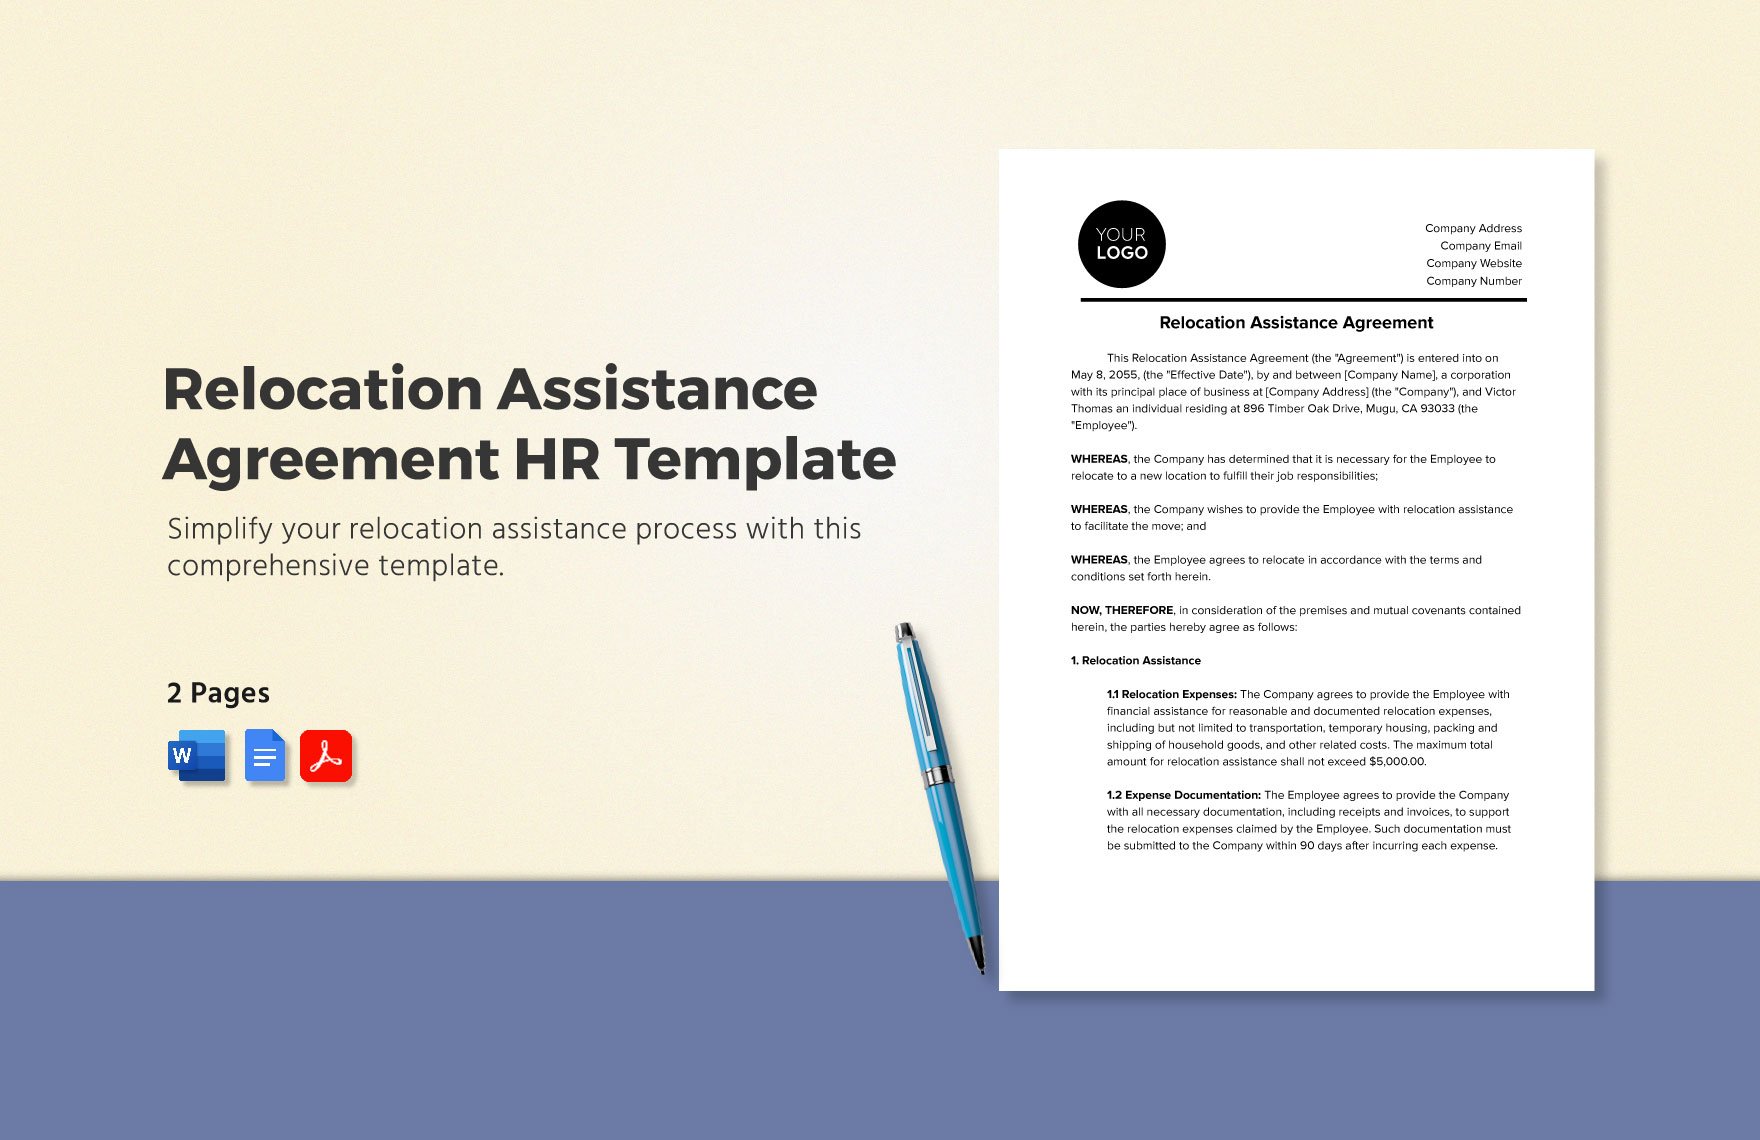 Relocation Assistance Agreement HR Template in Word, Google Docs, PDF